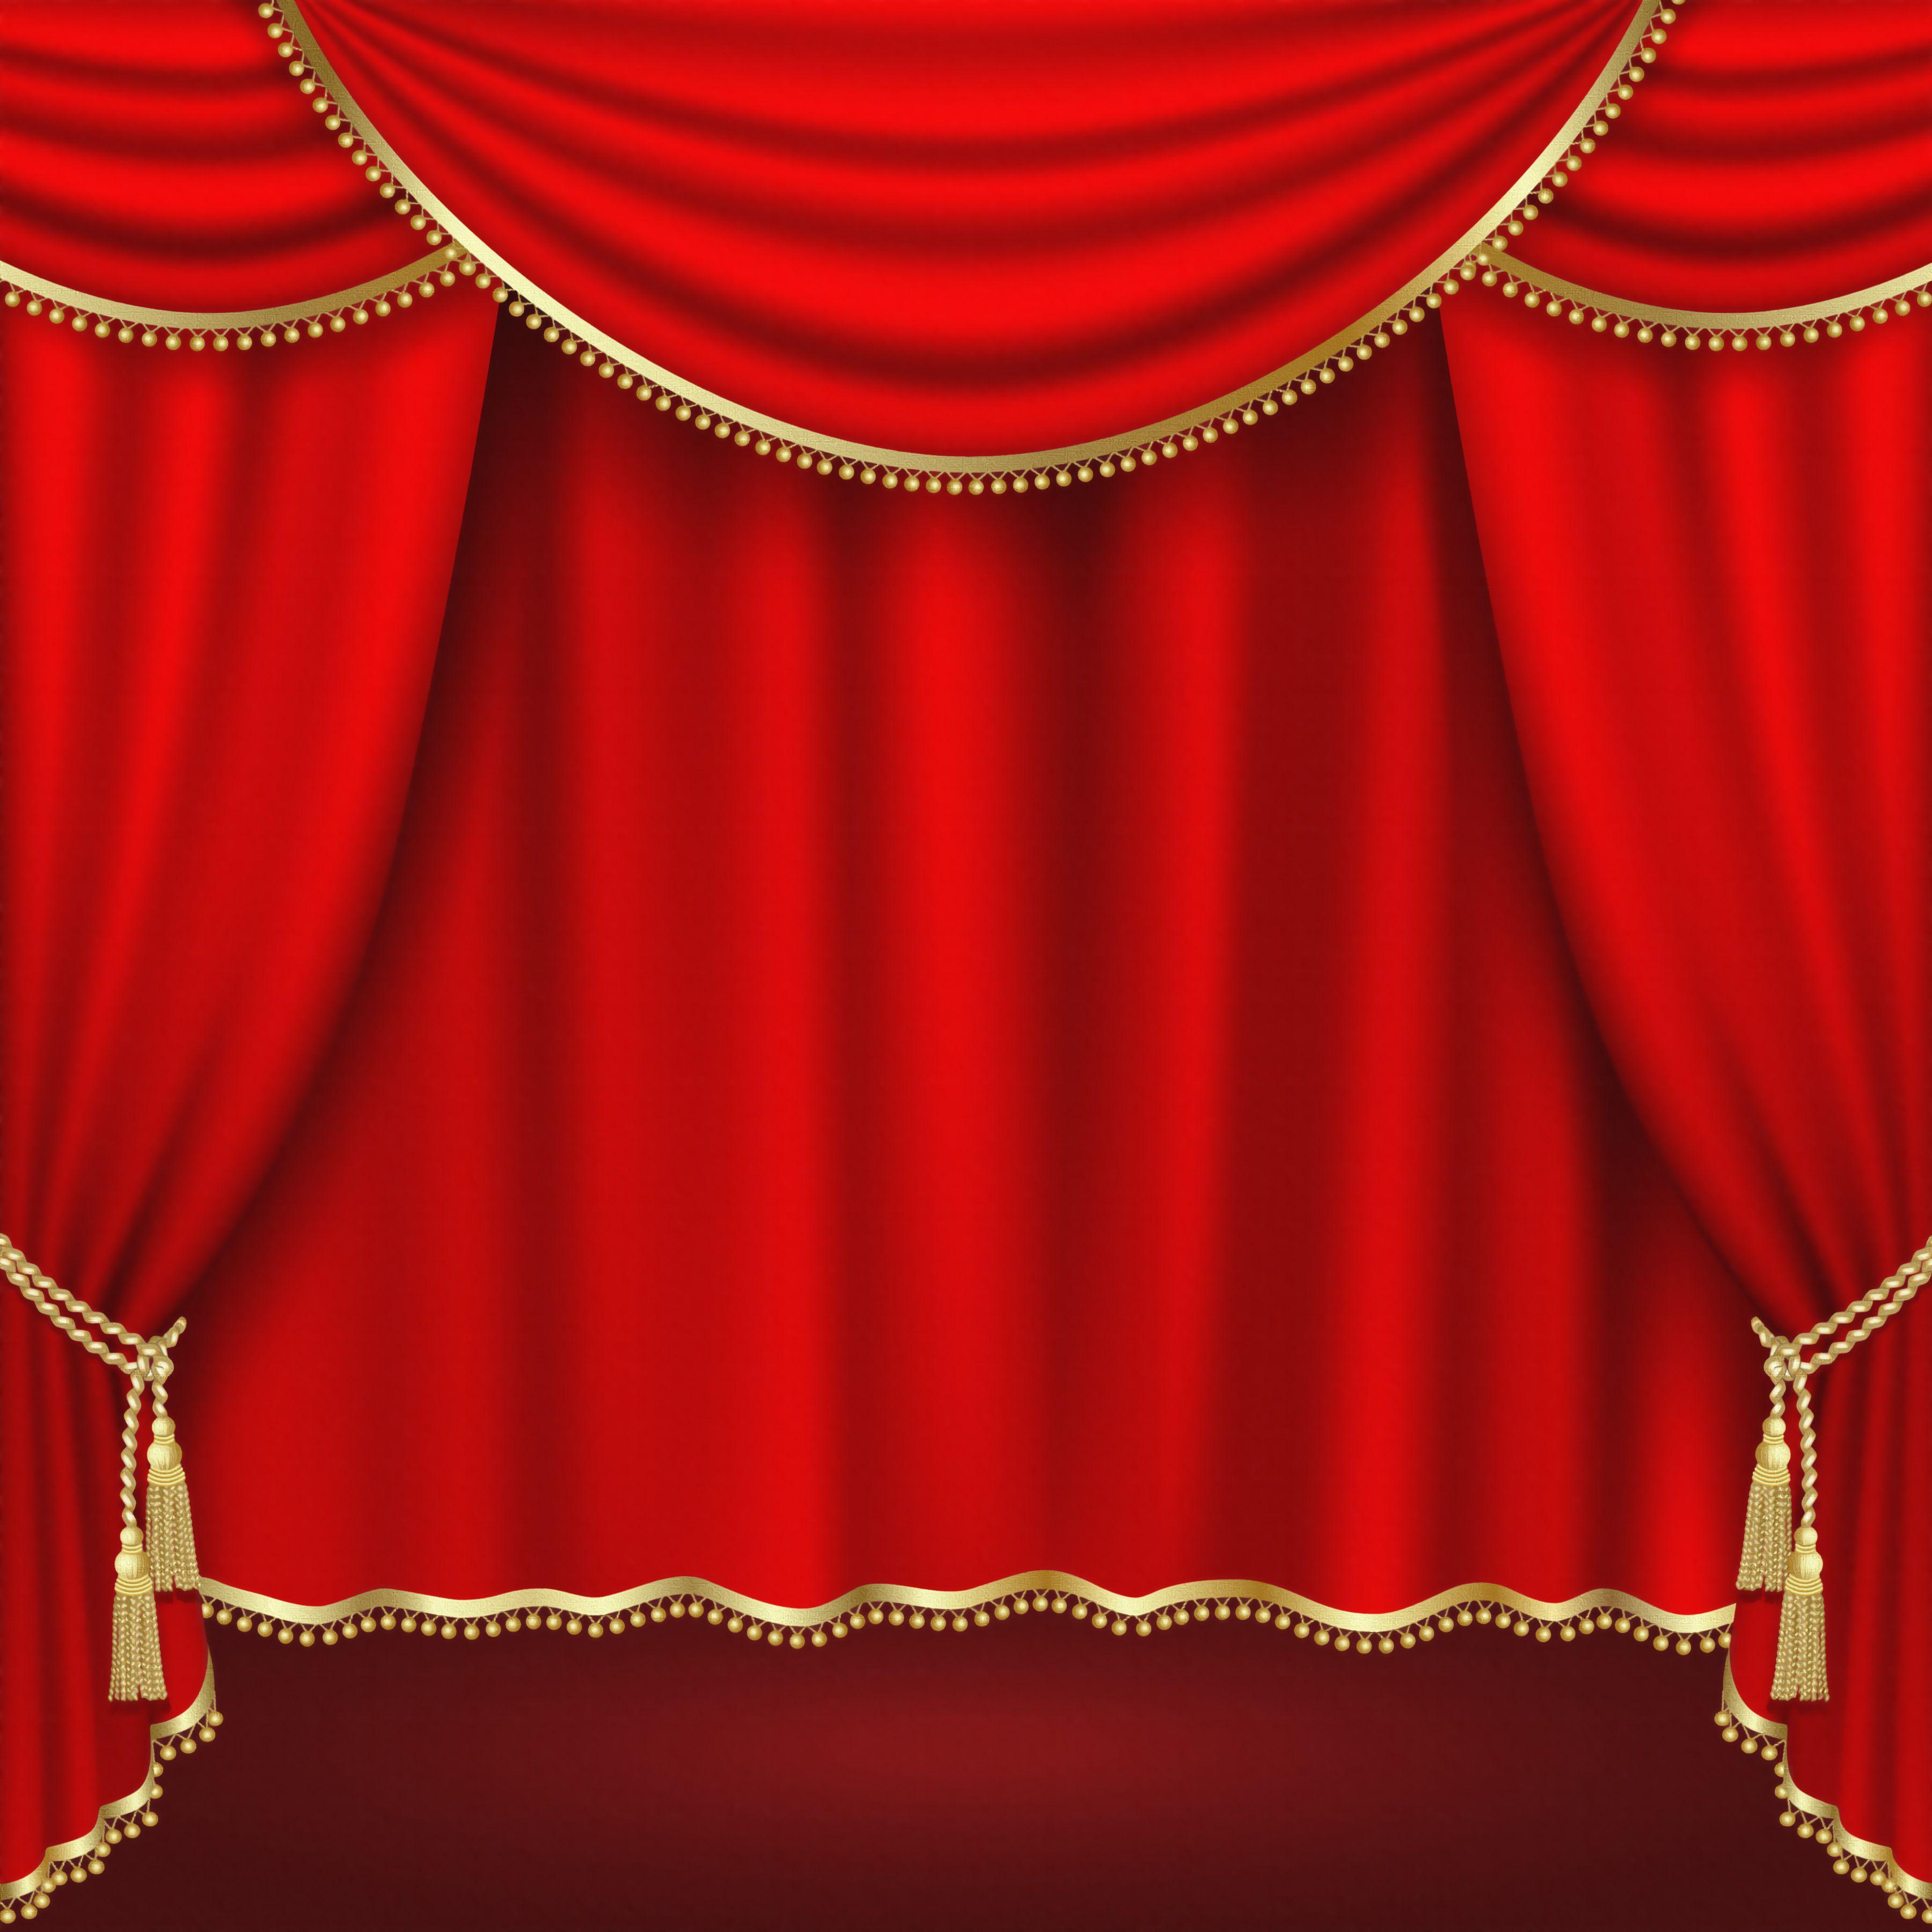 Curtain Backgrounds - Wallpaper Cave